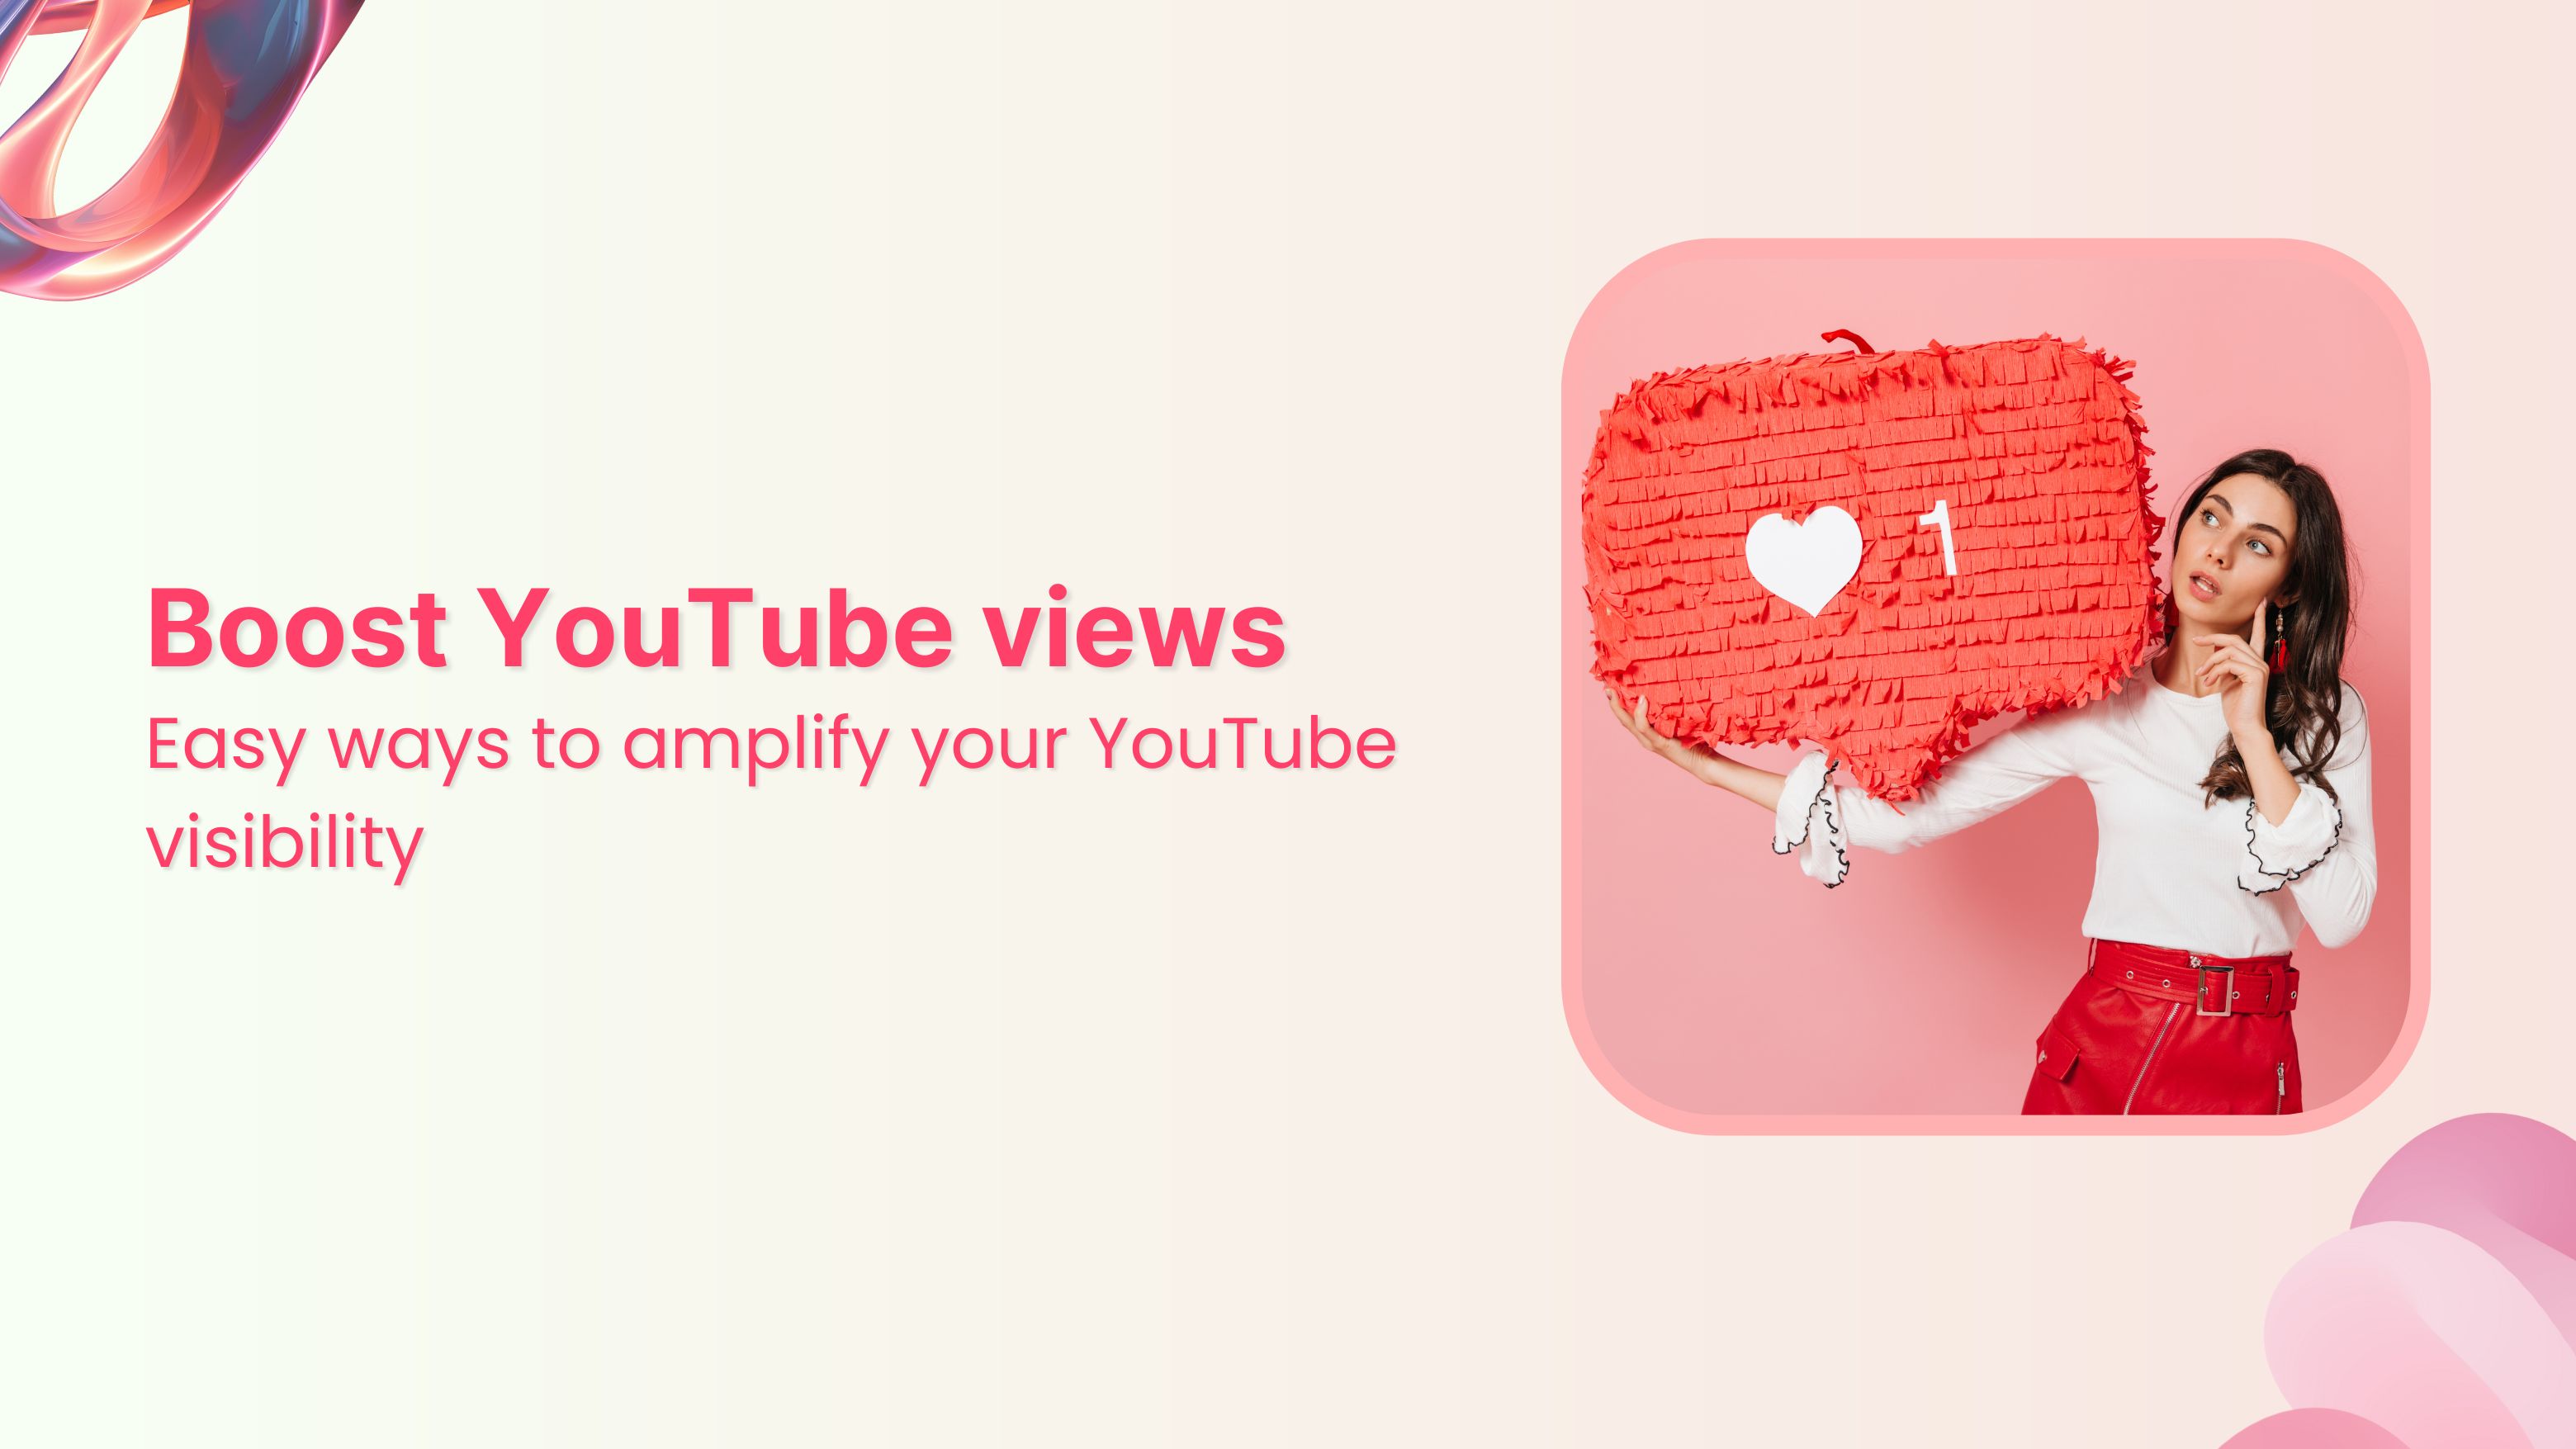 Boost your YouTube video views: 14 simple ways to follow